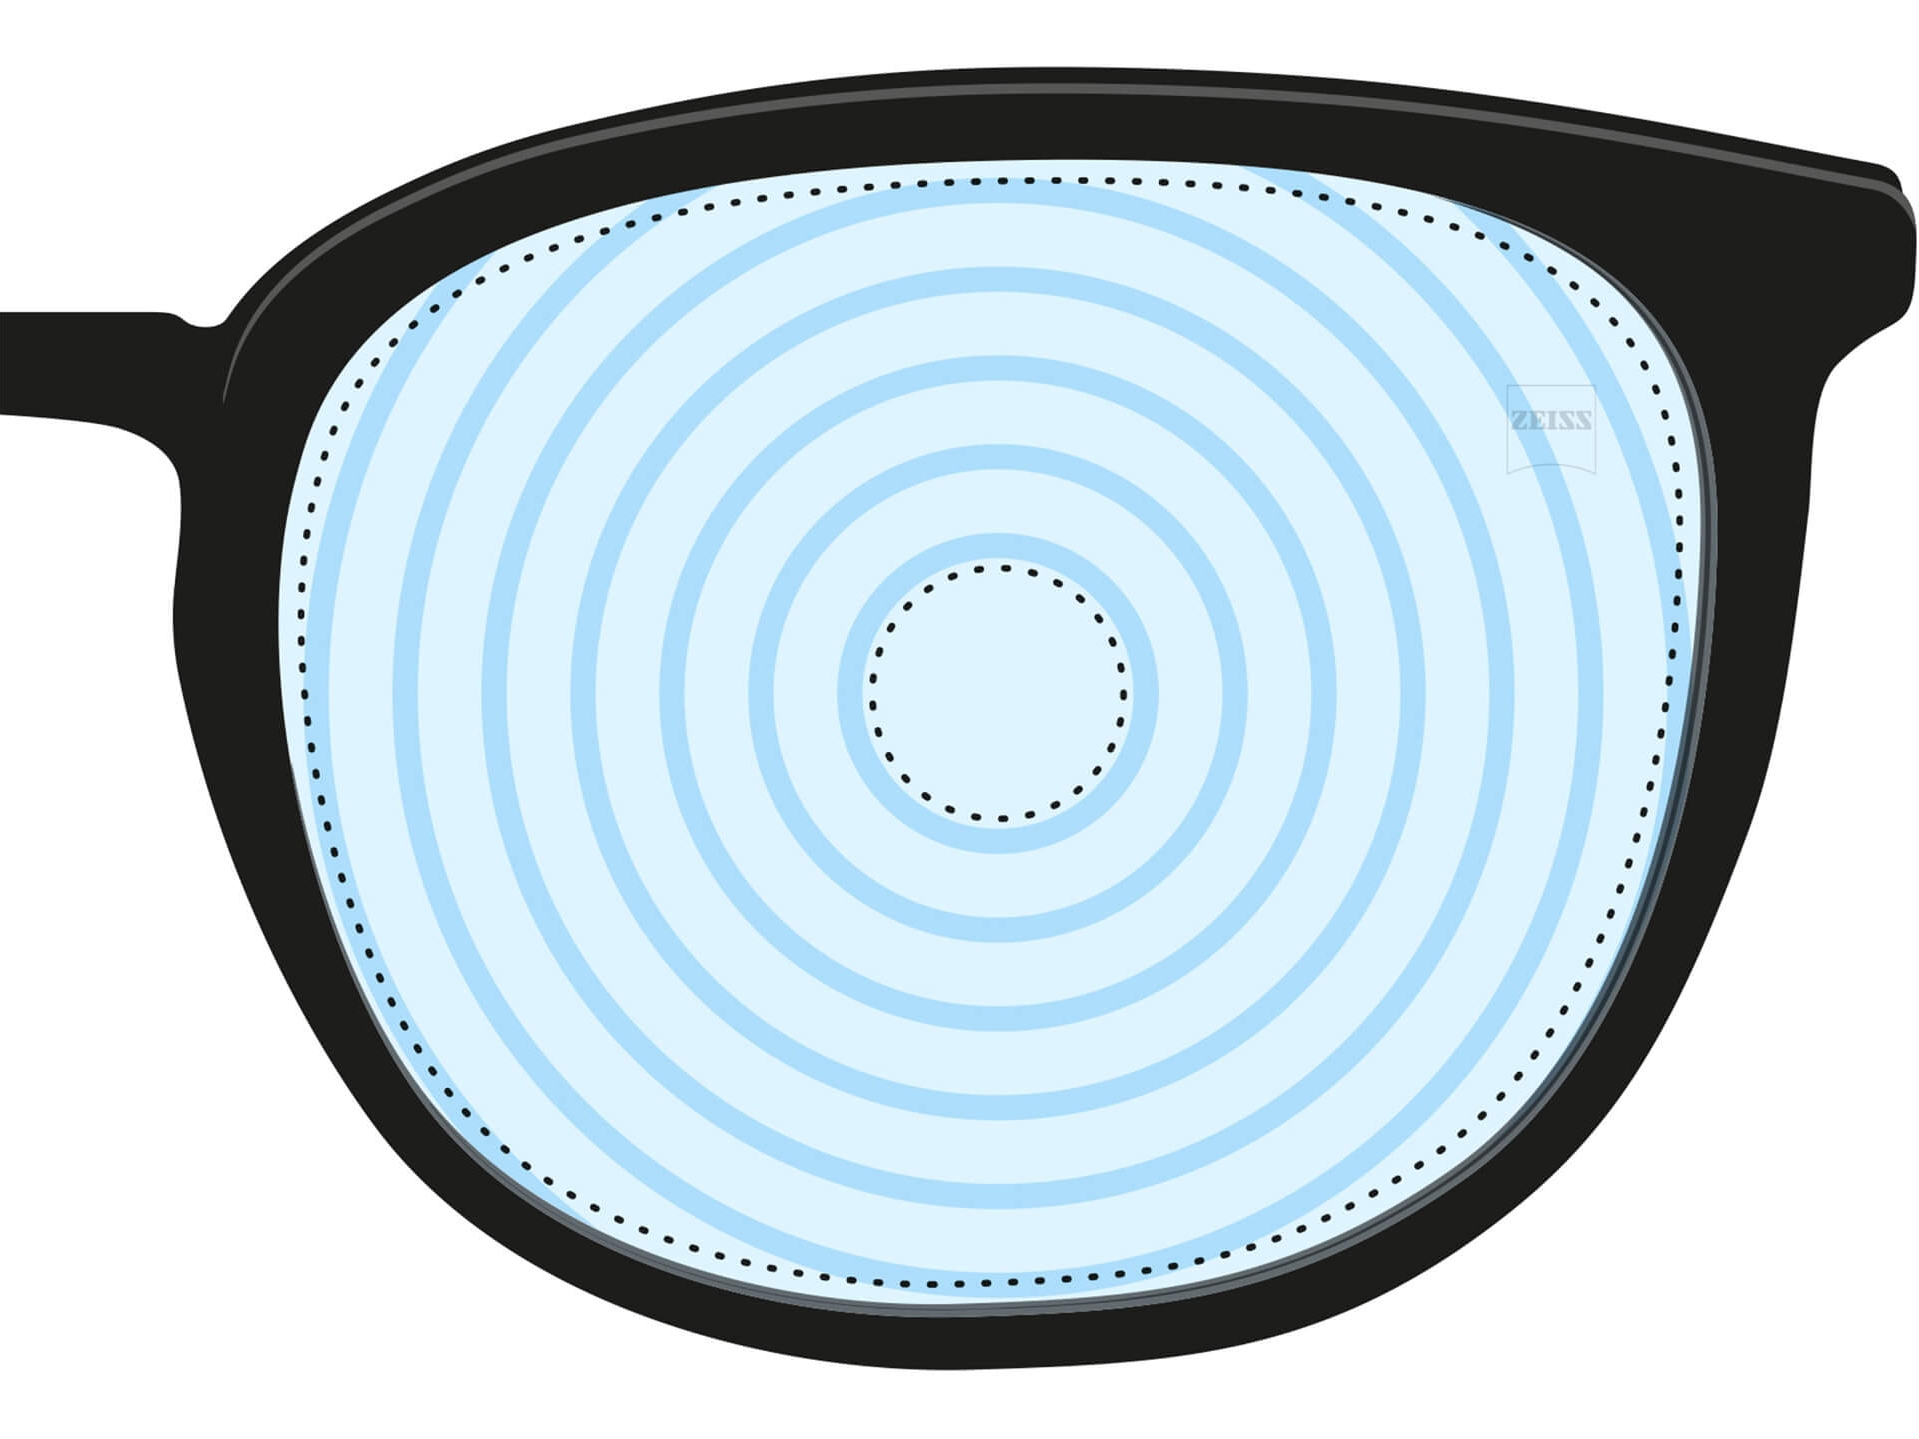 An illustration of a Myopia Management lens. It has concentric circles that represent different lens powers. It is an example of a lens design for a specialized purpose.